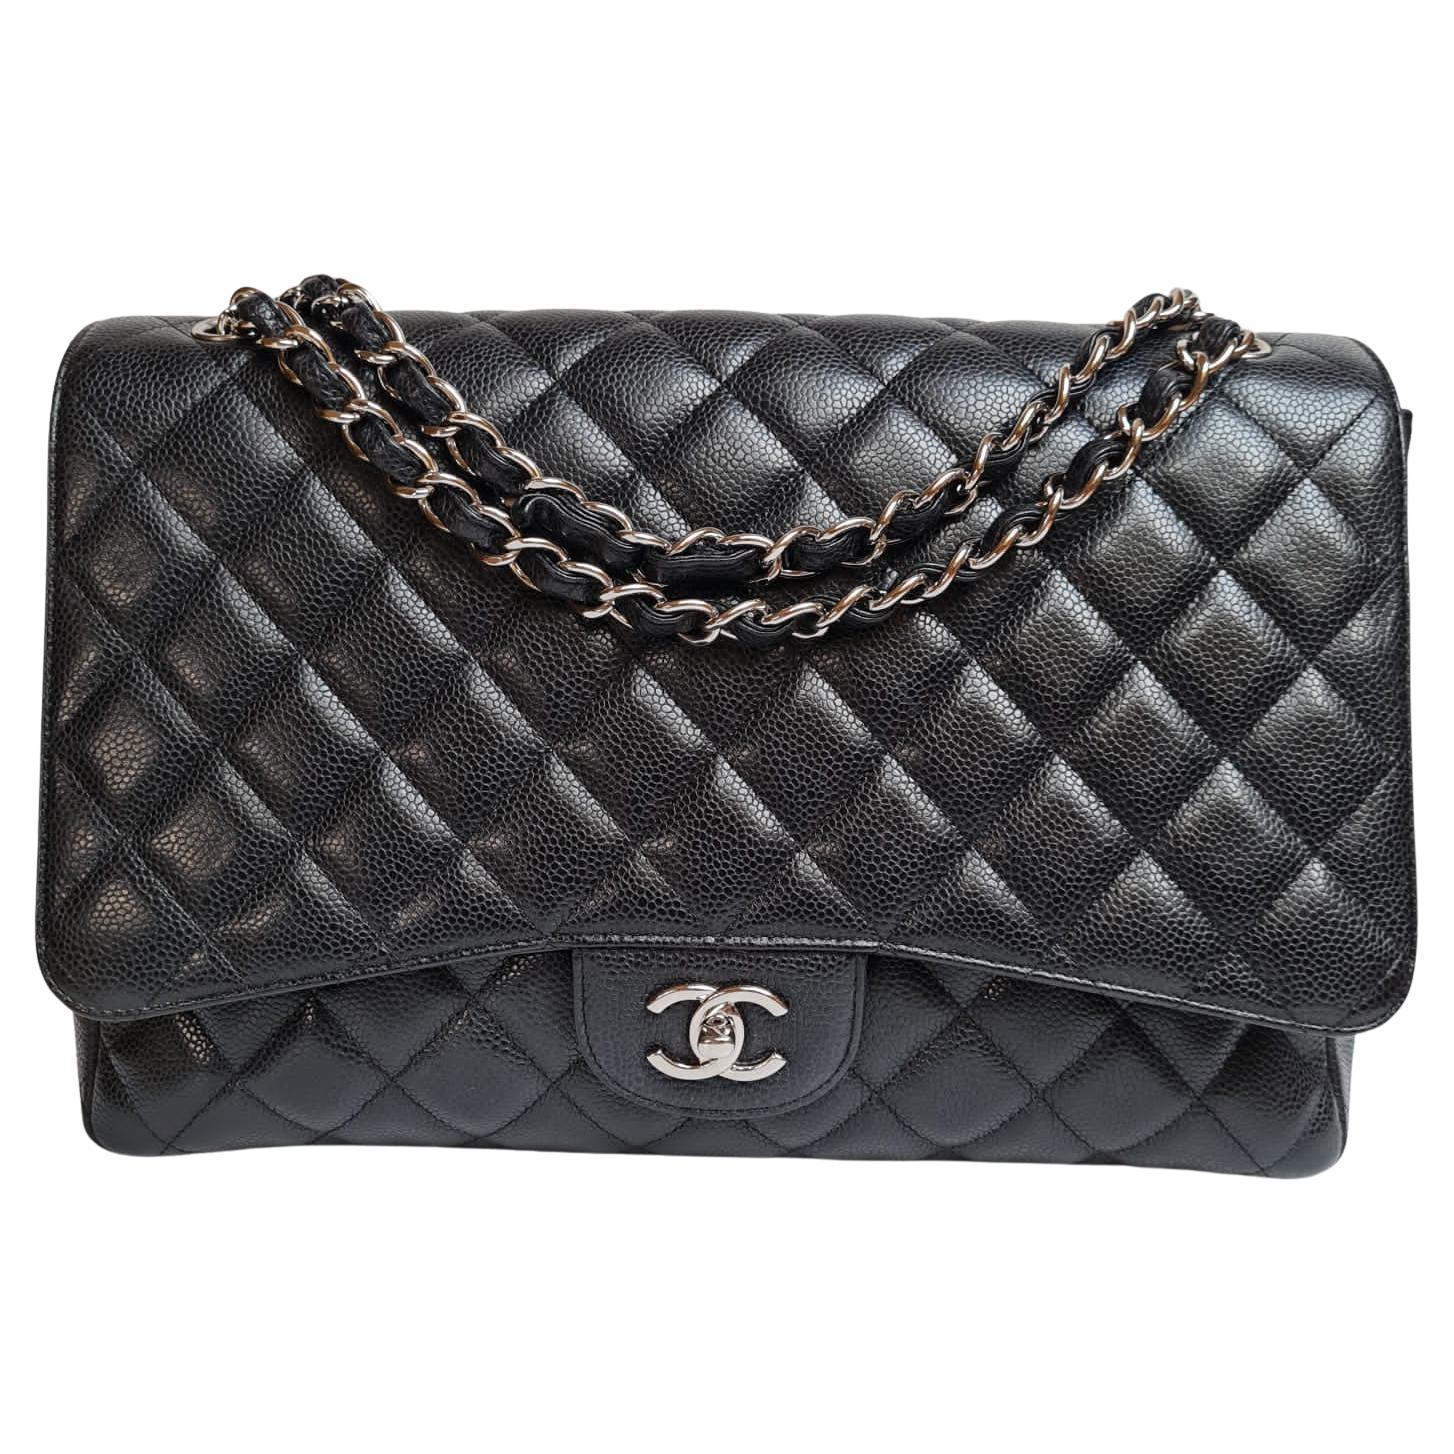 Chanel Black Maxi Caviar Leather Quilted Single Flap Bag